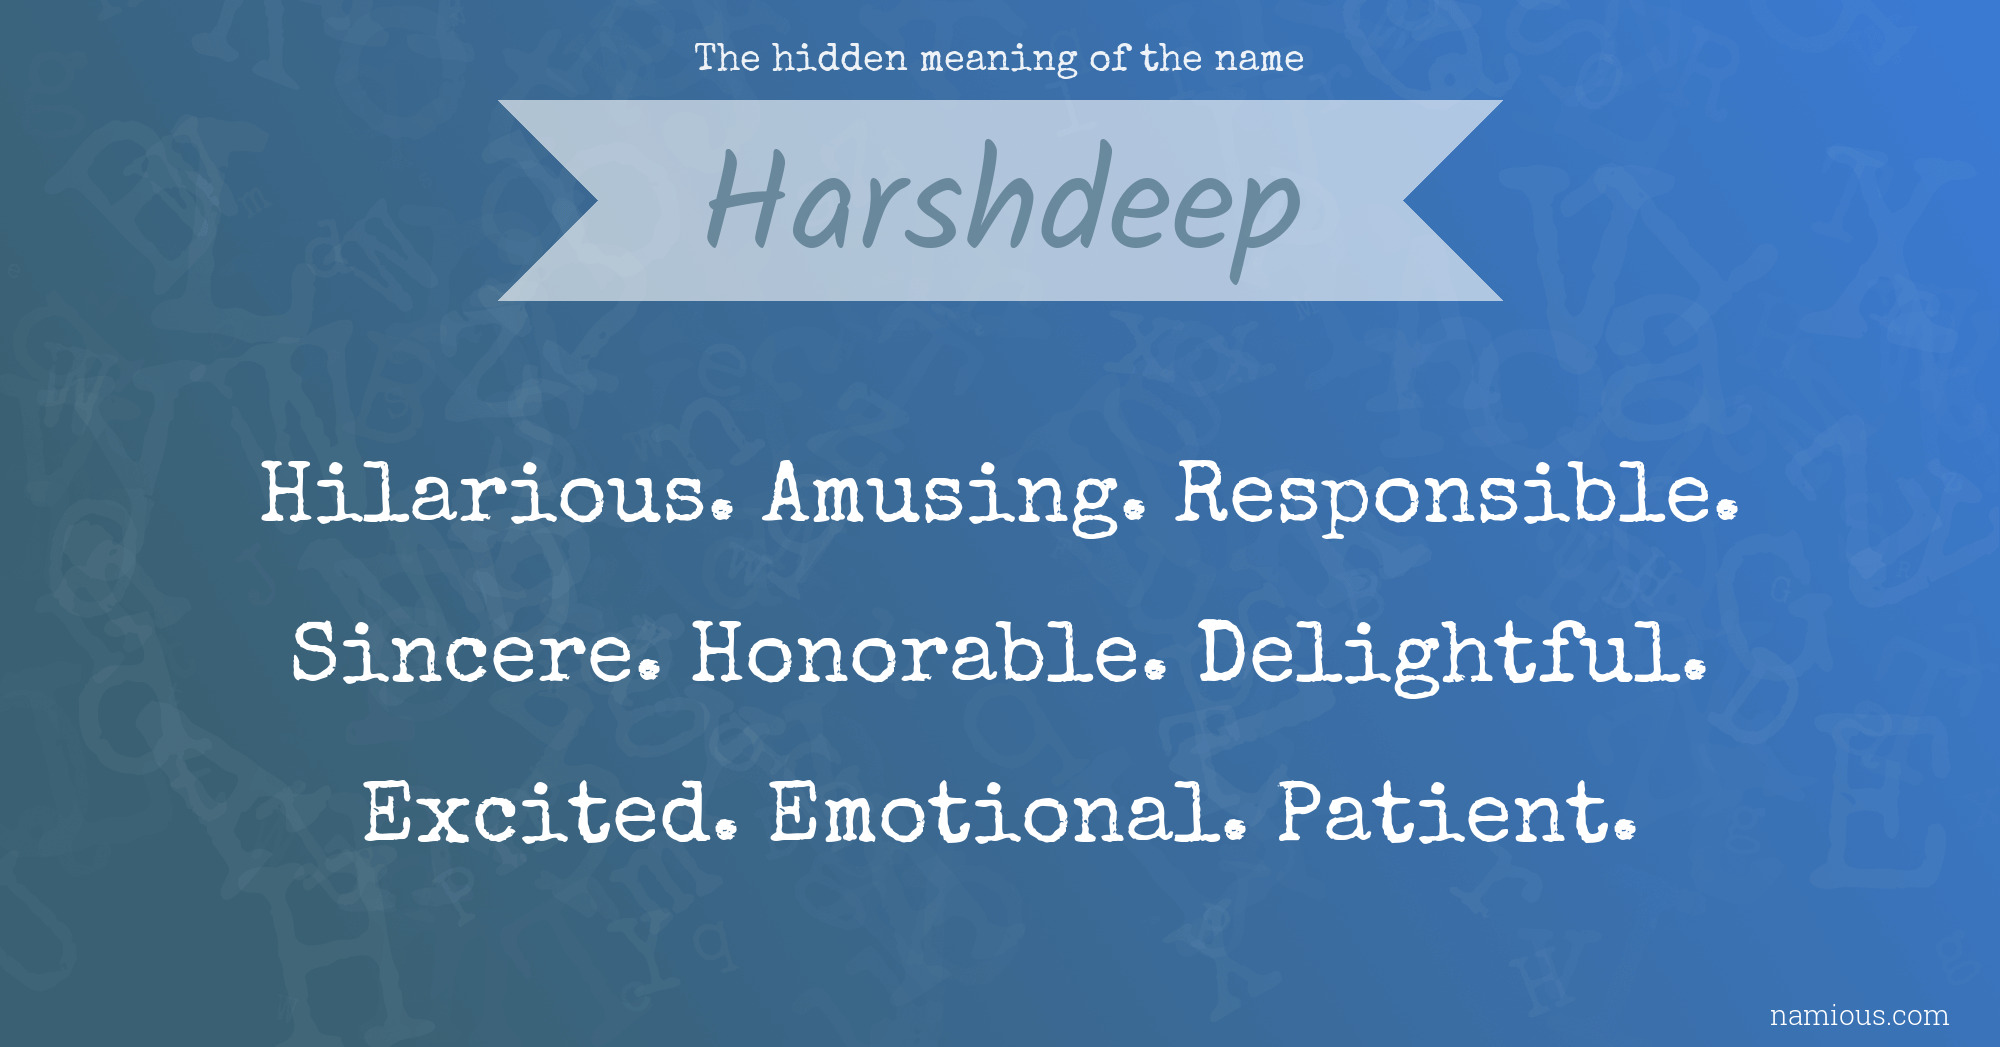 The hidden meaning of the name Harshdeep